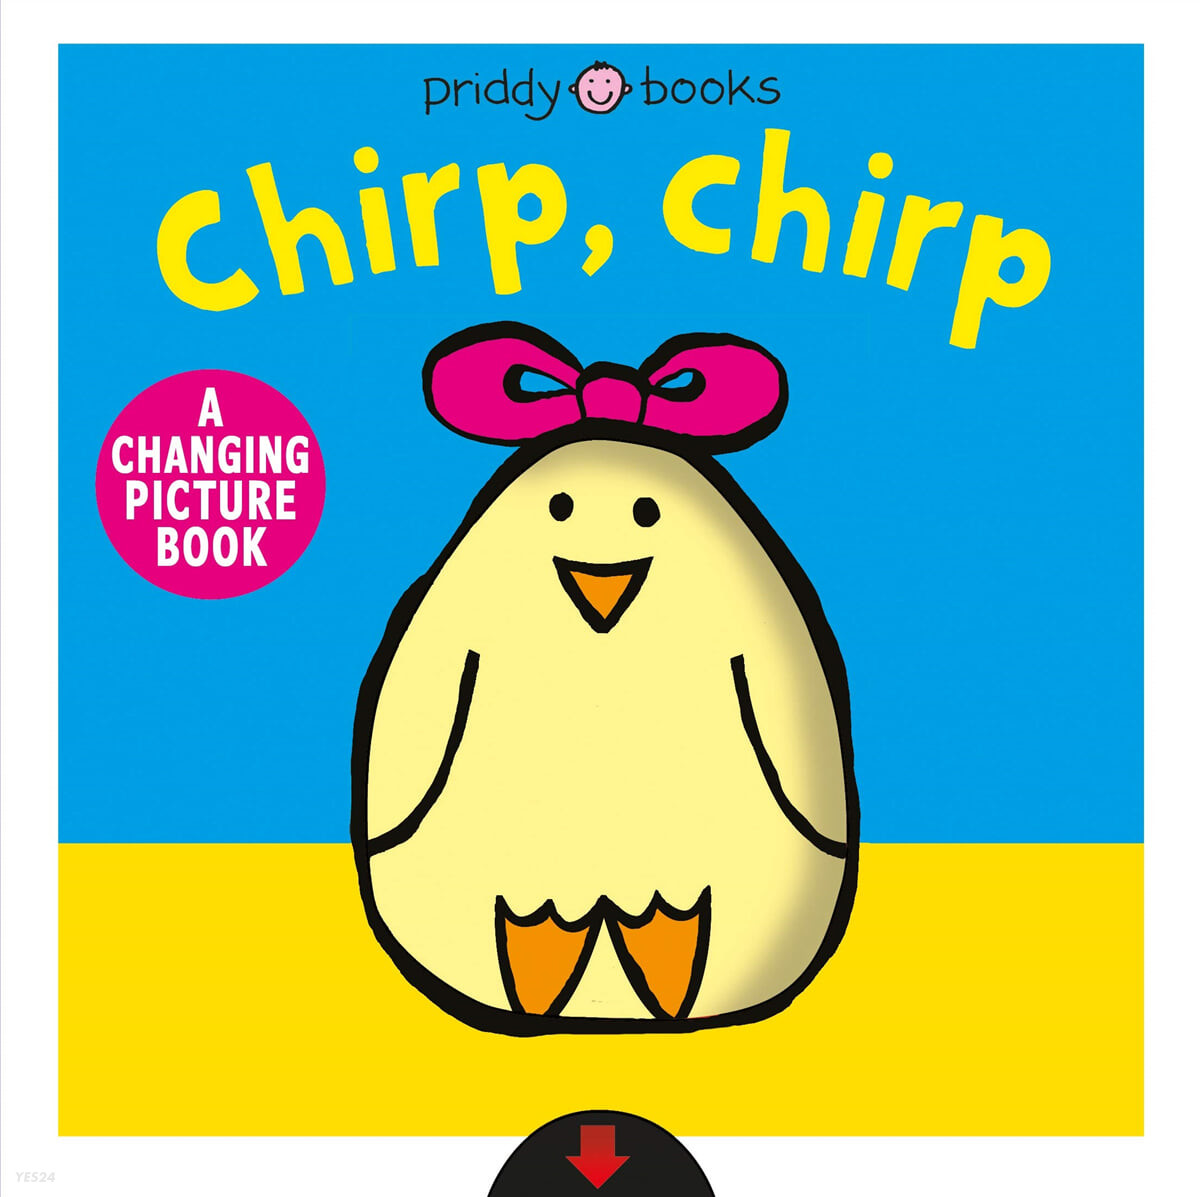 Chirp chirp : a changing picture book